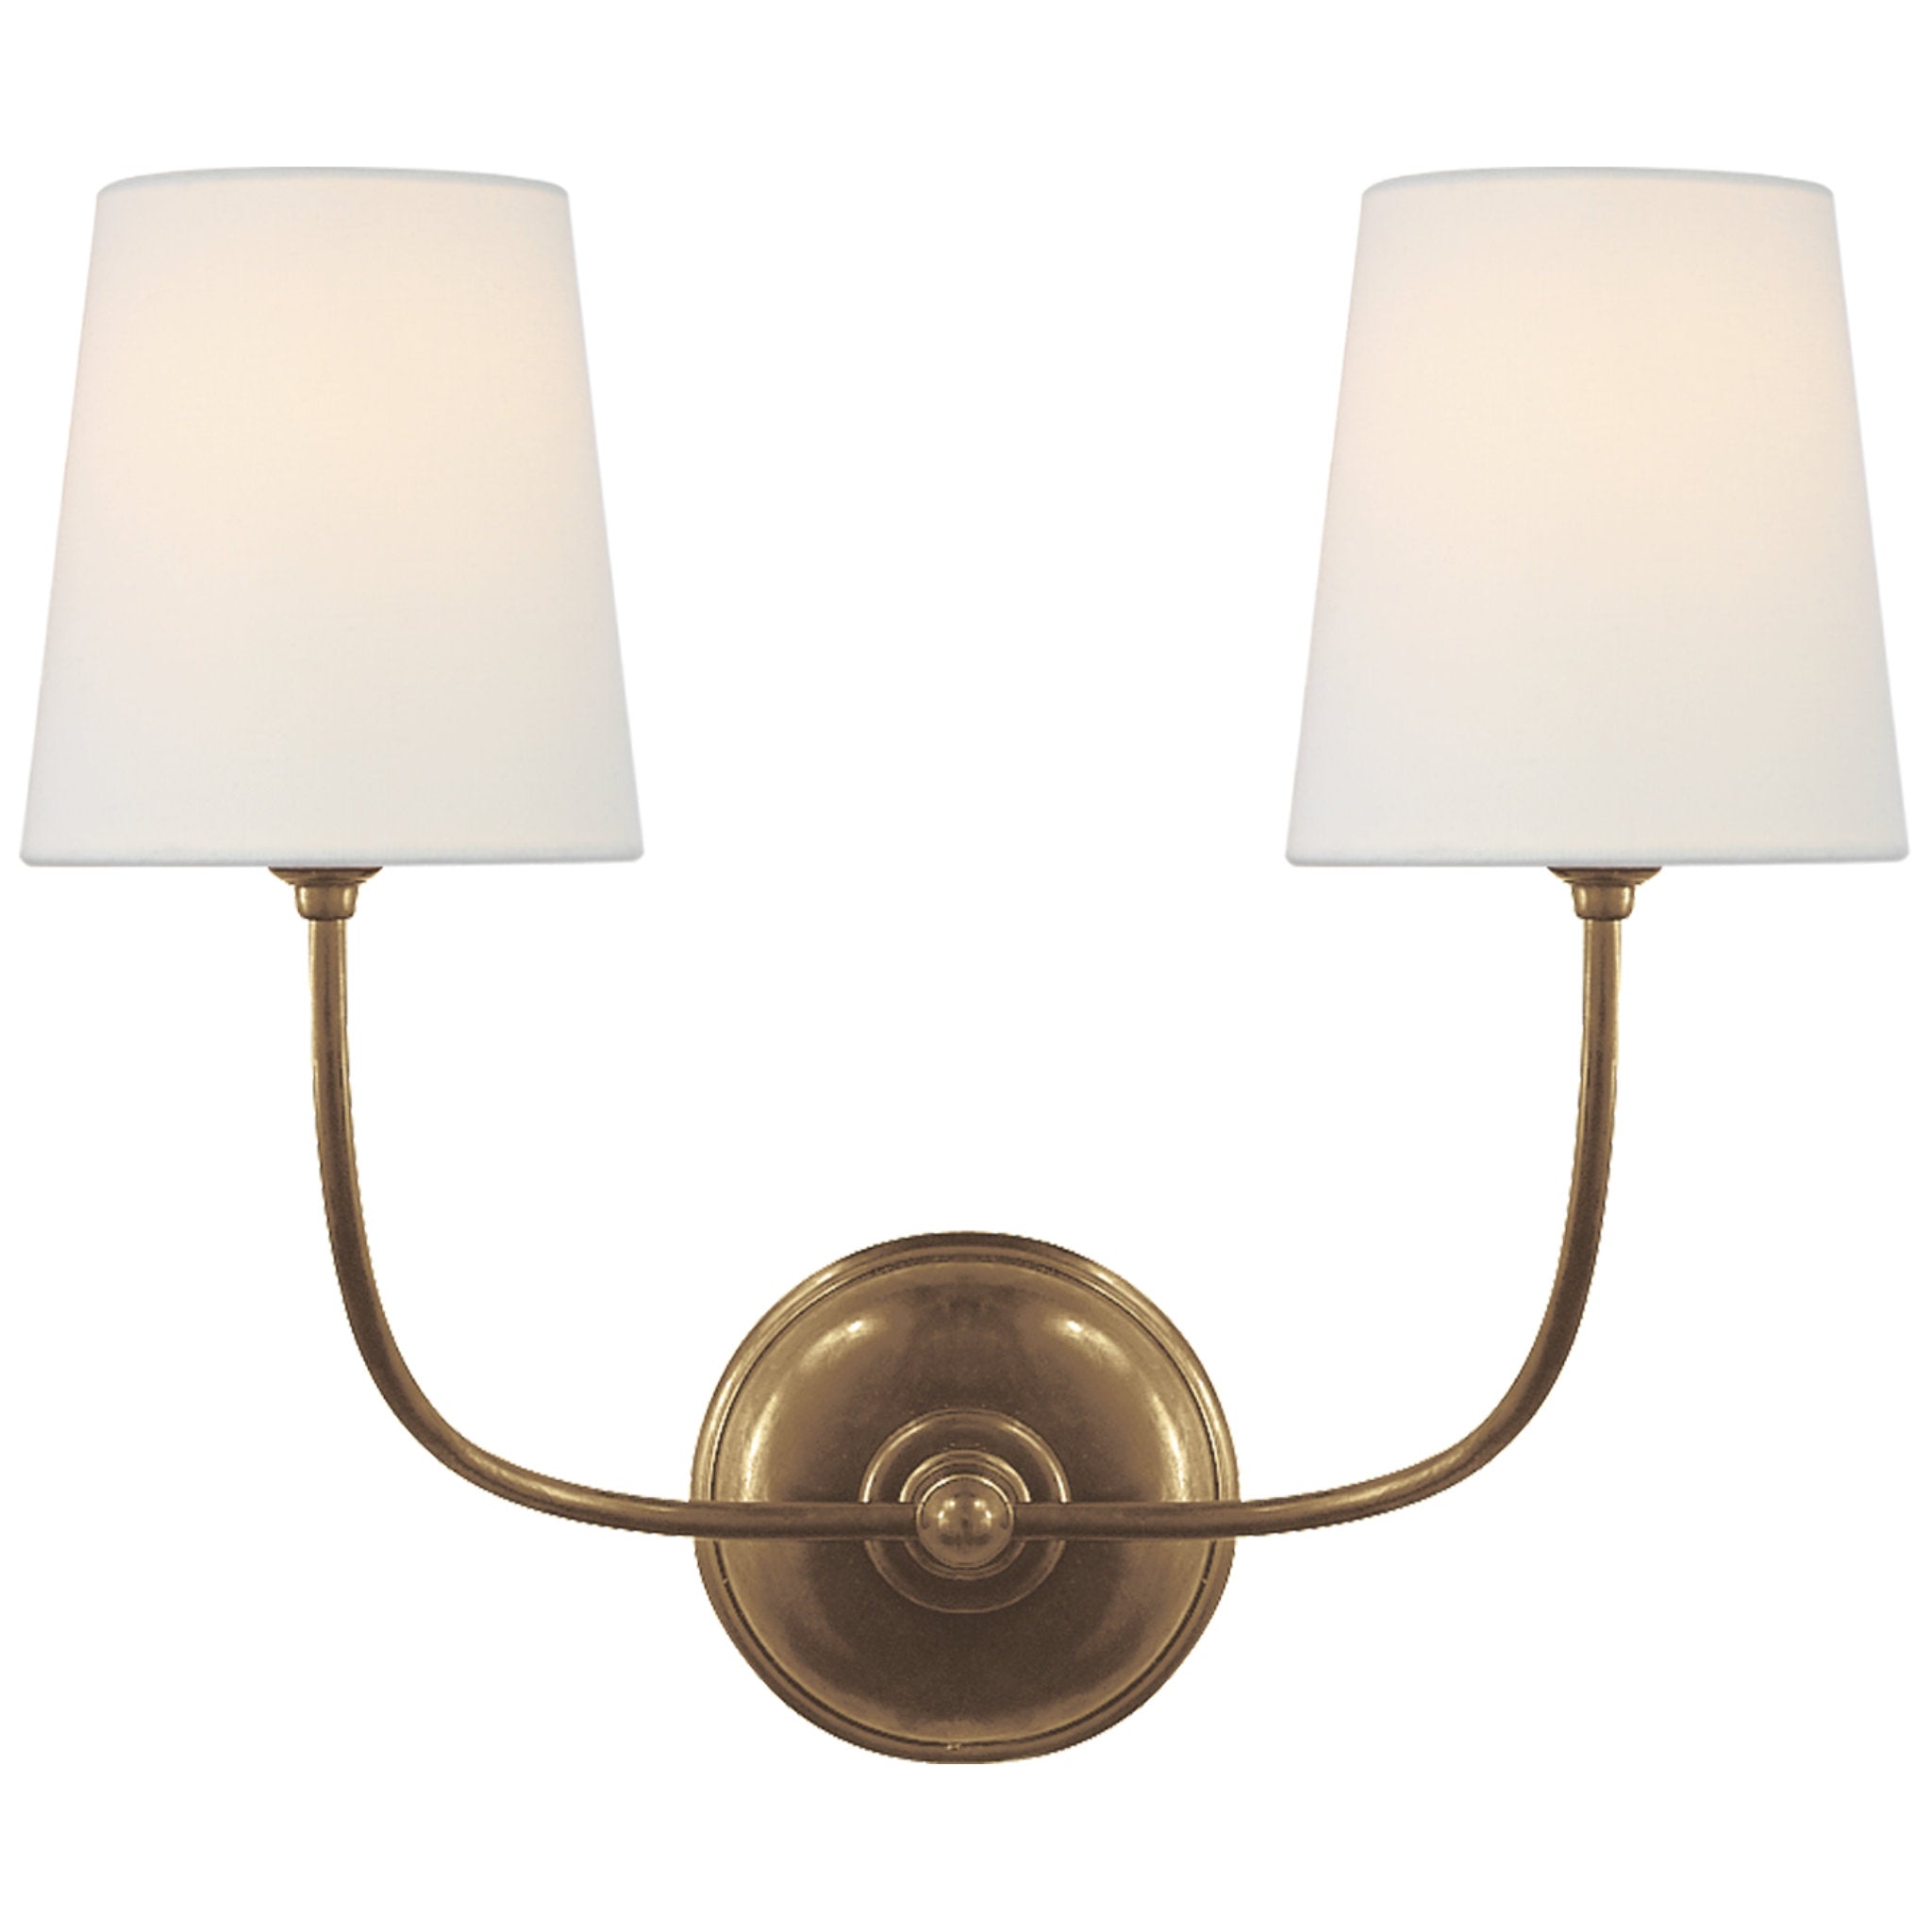 Thomas O'Brien Vendome Double Sconce in Hand-Rubbed Antique Brass with Linen Shades